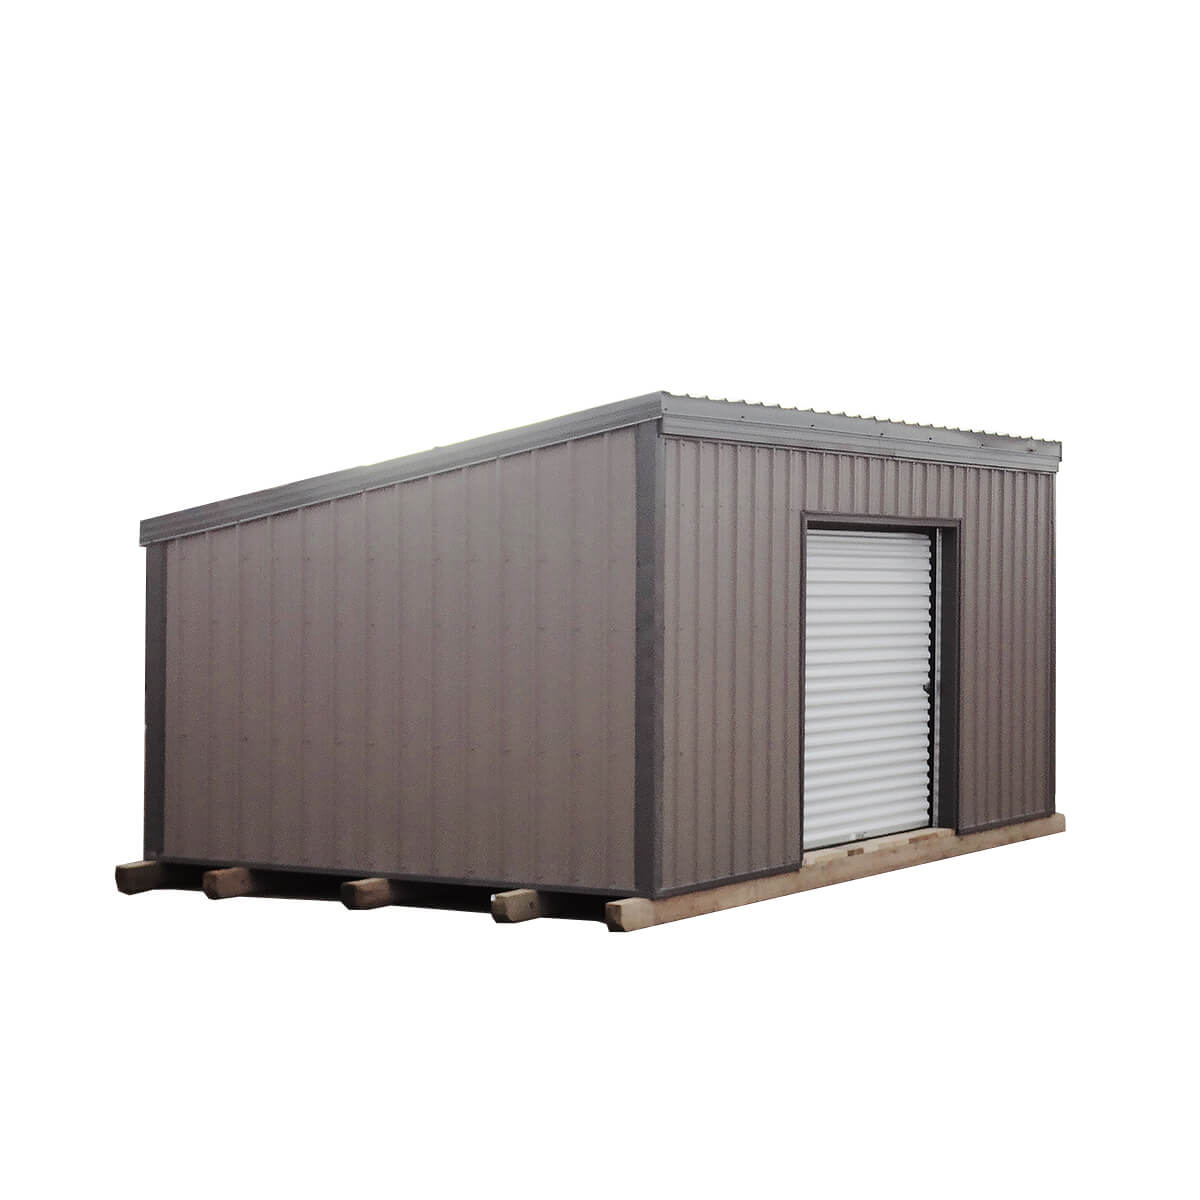 Cladded Equipment Shed - 11-ft-4-in x 20-ft